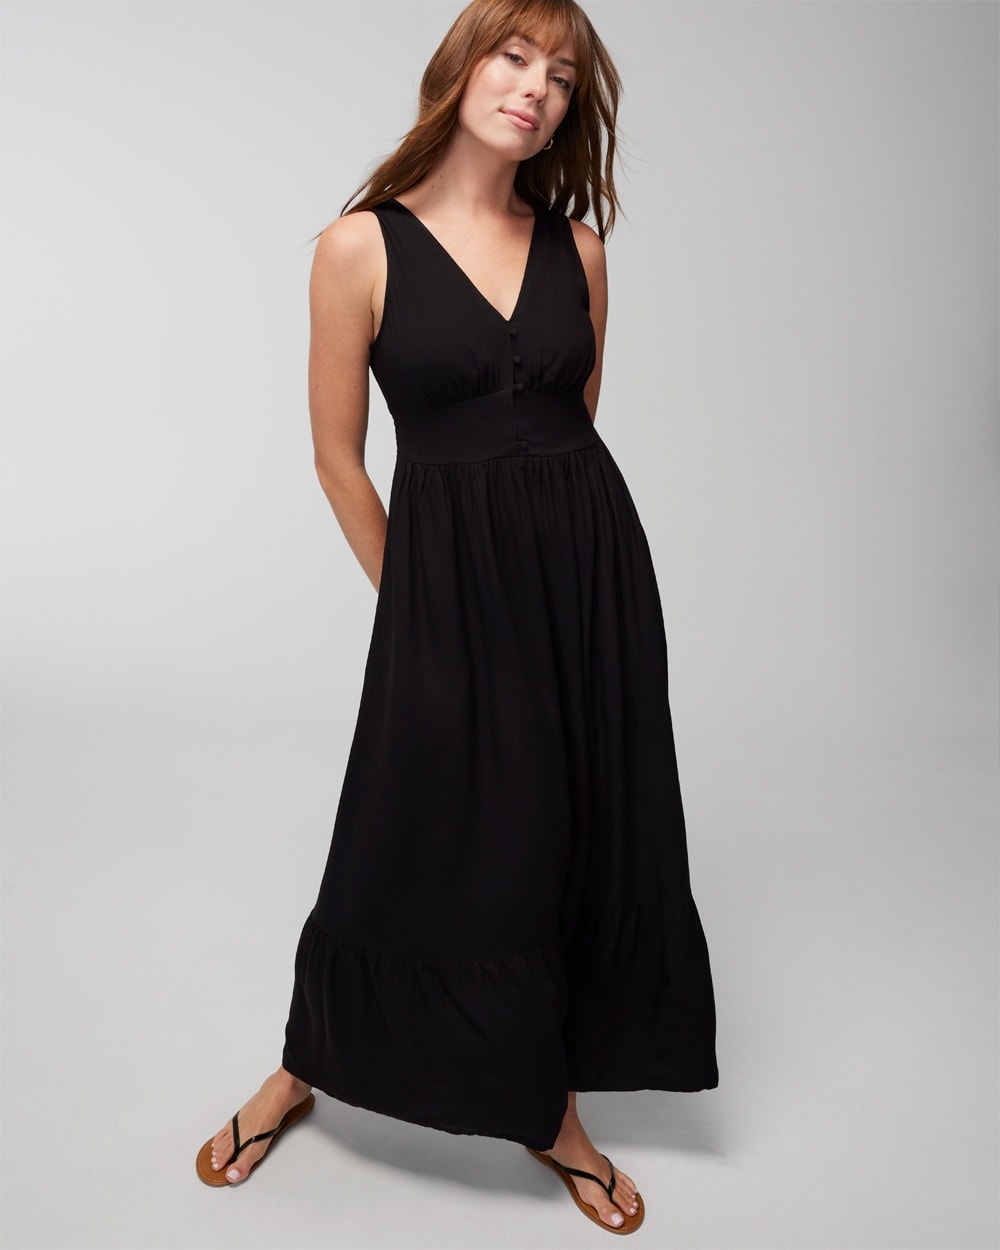 Buy Women's Casual Knee Length Dresses for Summer  3 Tier A-Line Black  Dress/Girls Wear/Fashion Outfits/Clothes for Ladies (Small) at